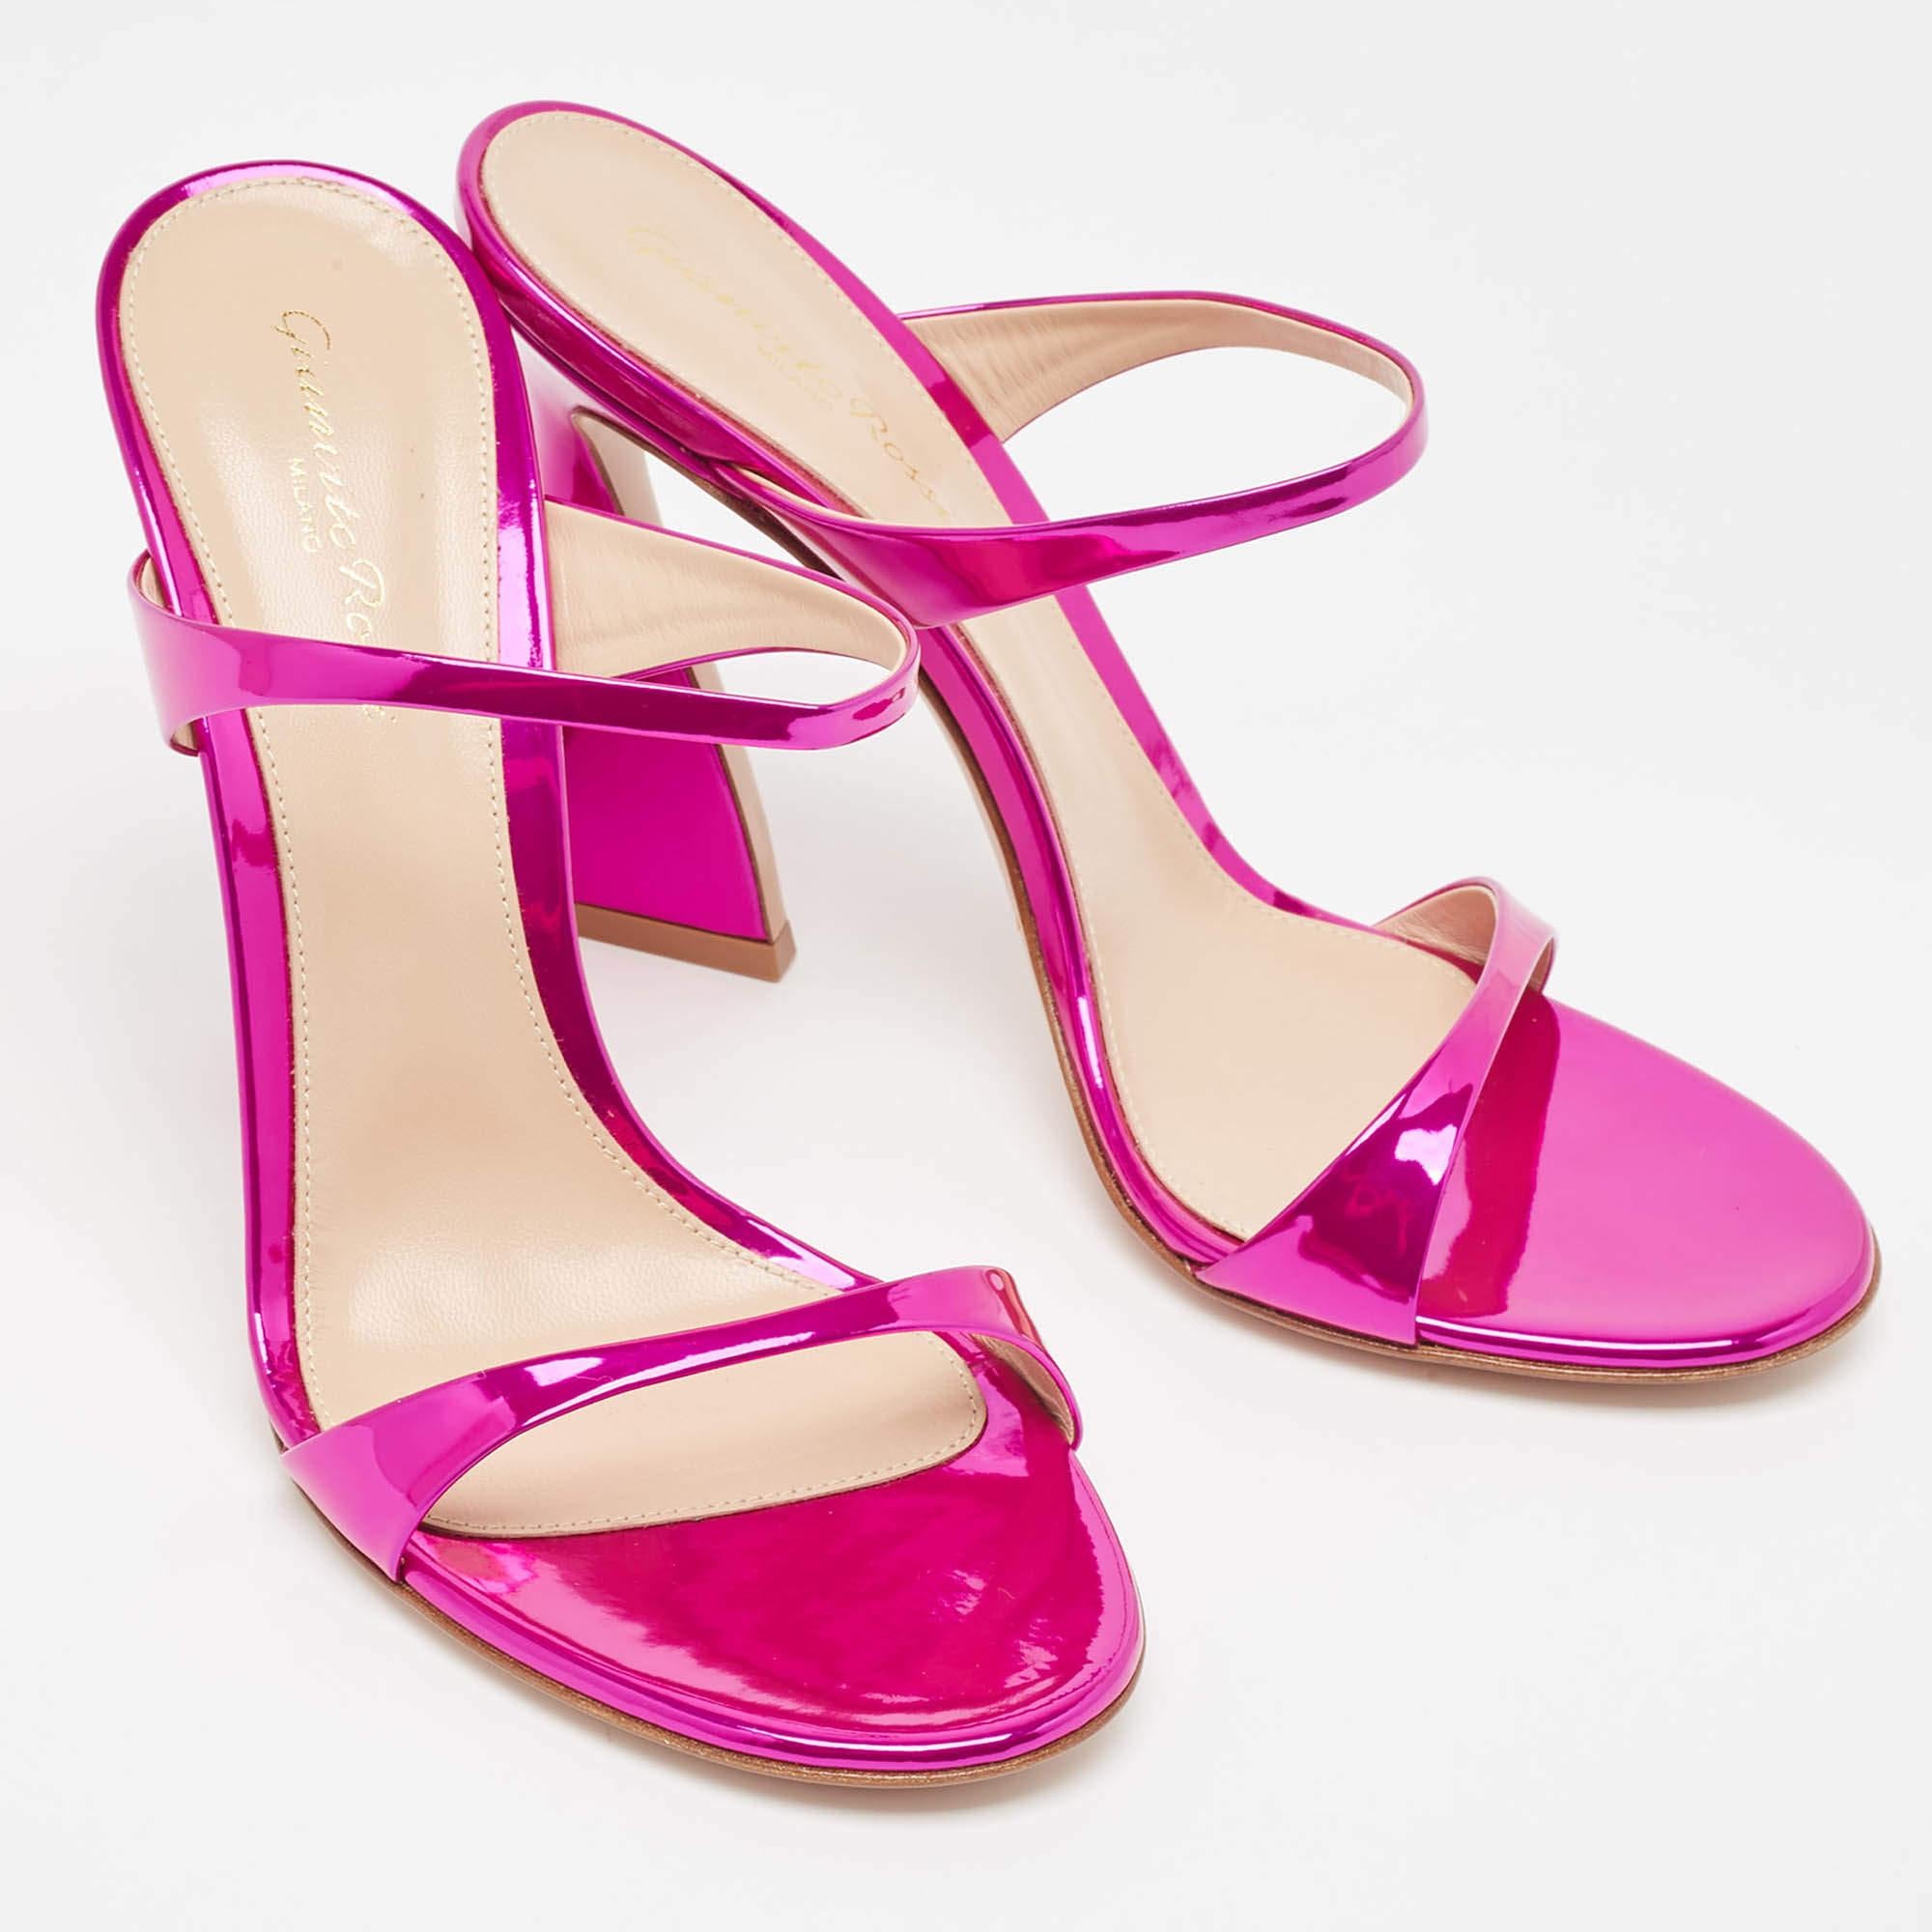 Gianvito Rossi Metallic Pink Leather Aura Sandals Size 39.5 For Sale 3